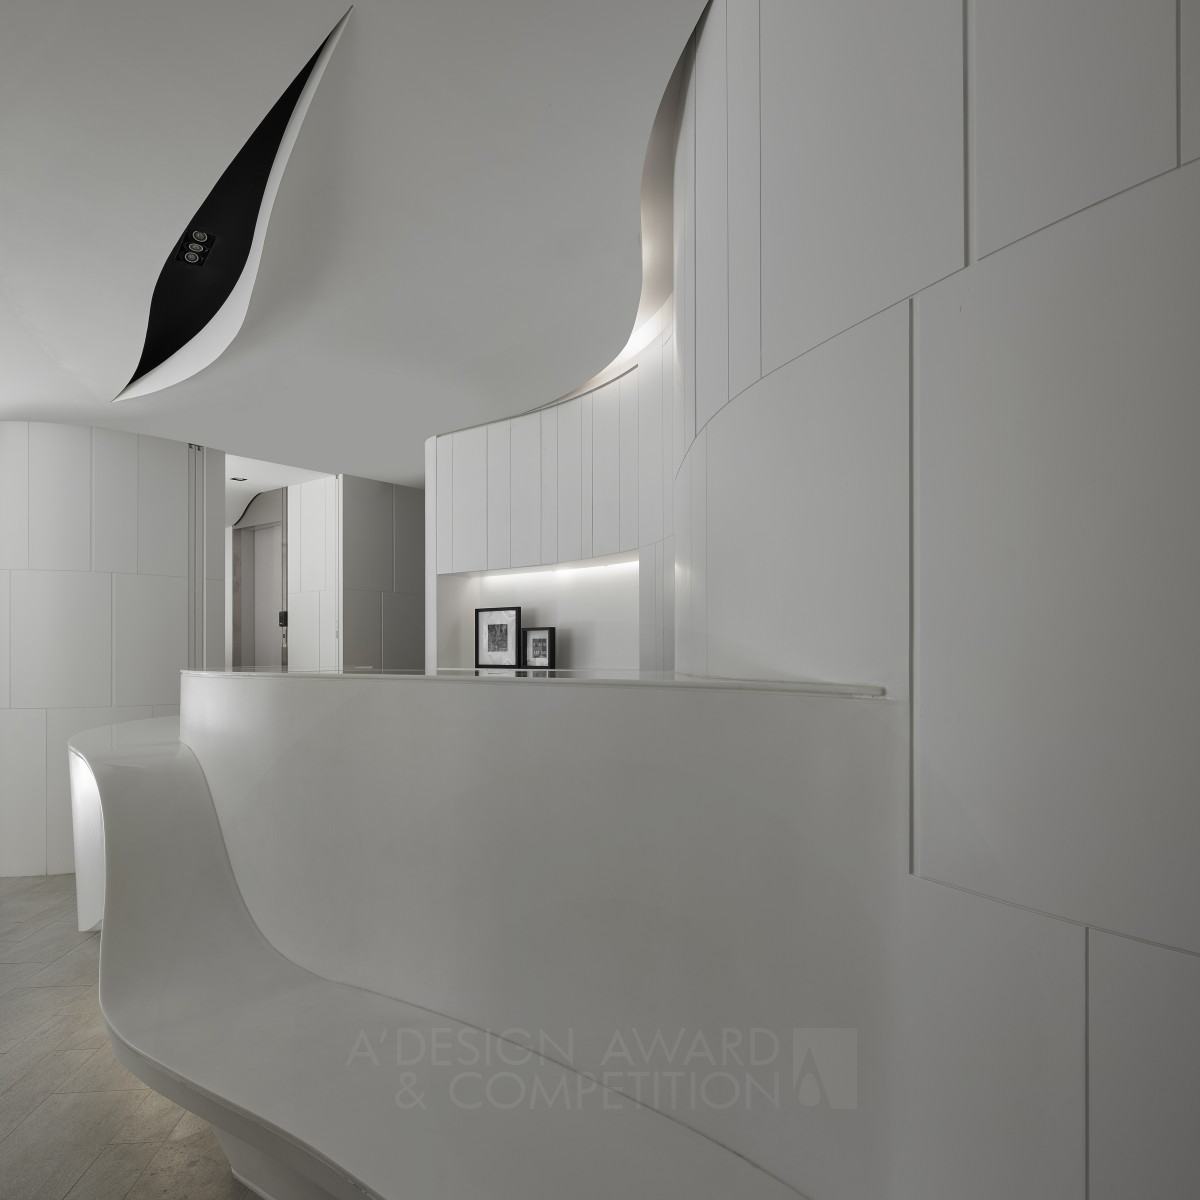 Curvature / Dimension and Extension Dentist Clinic by Tang, chung-han